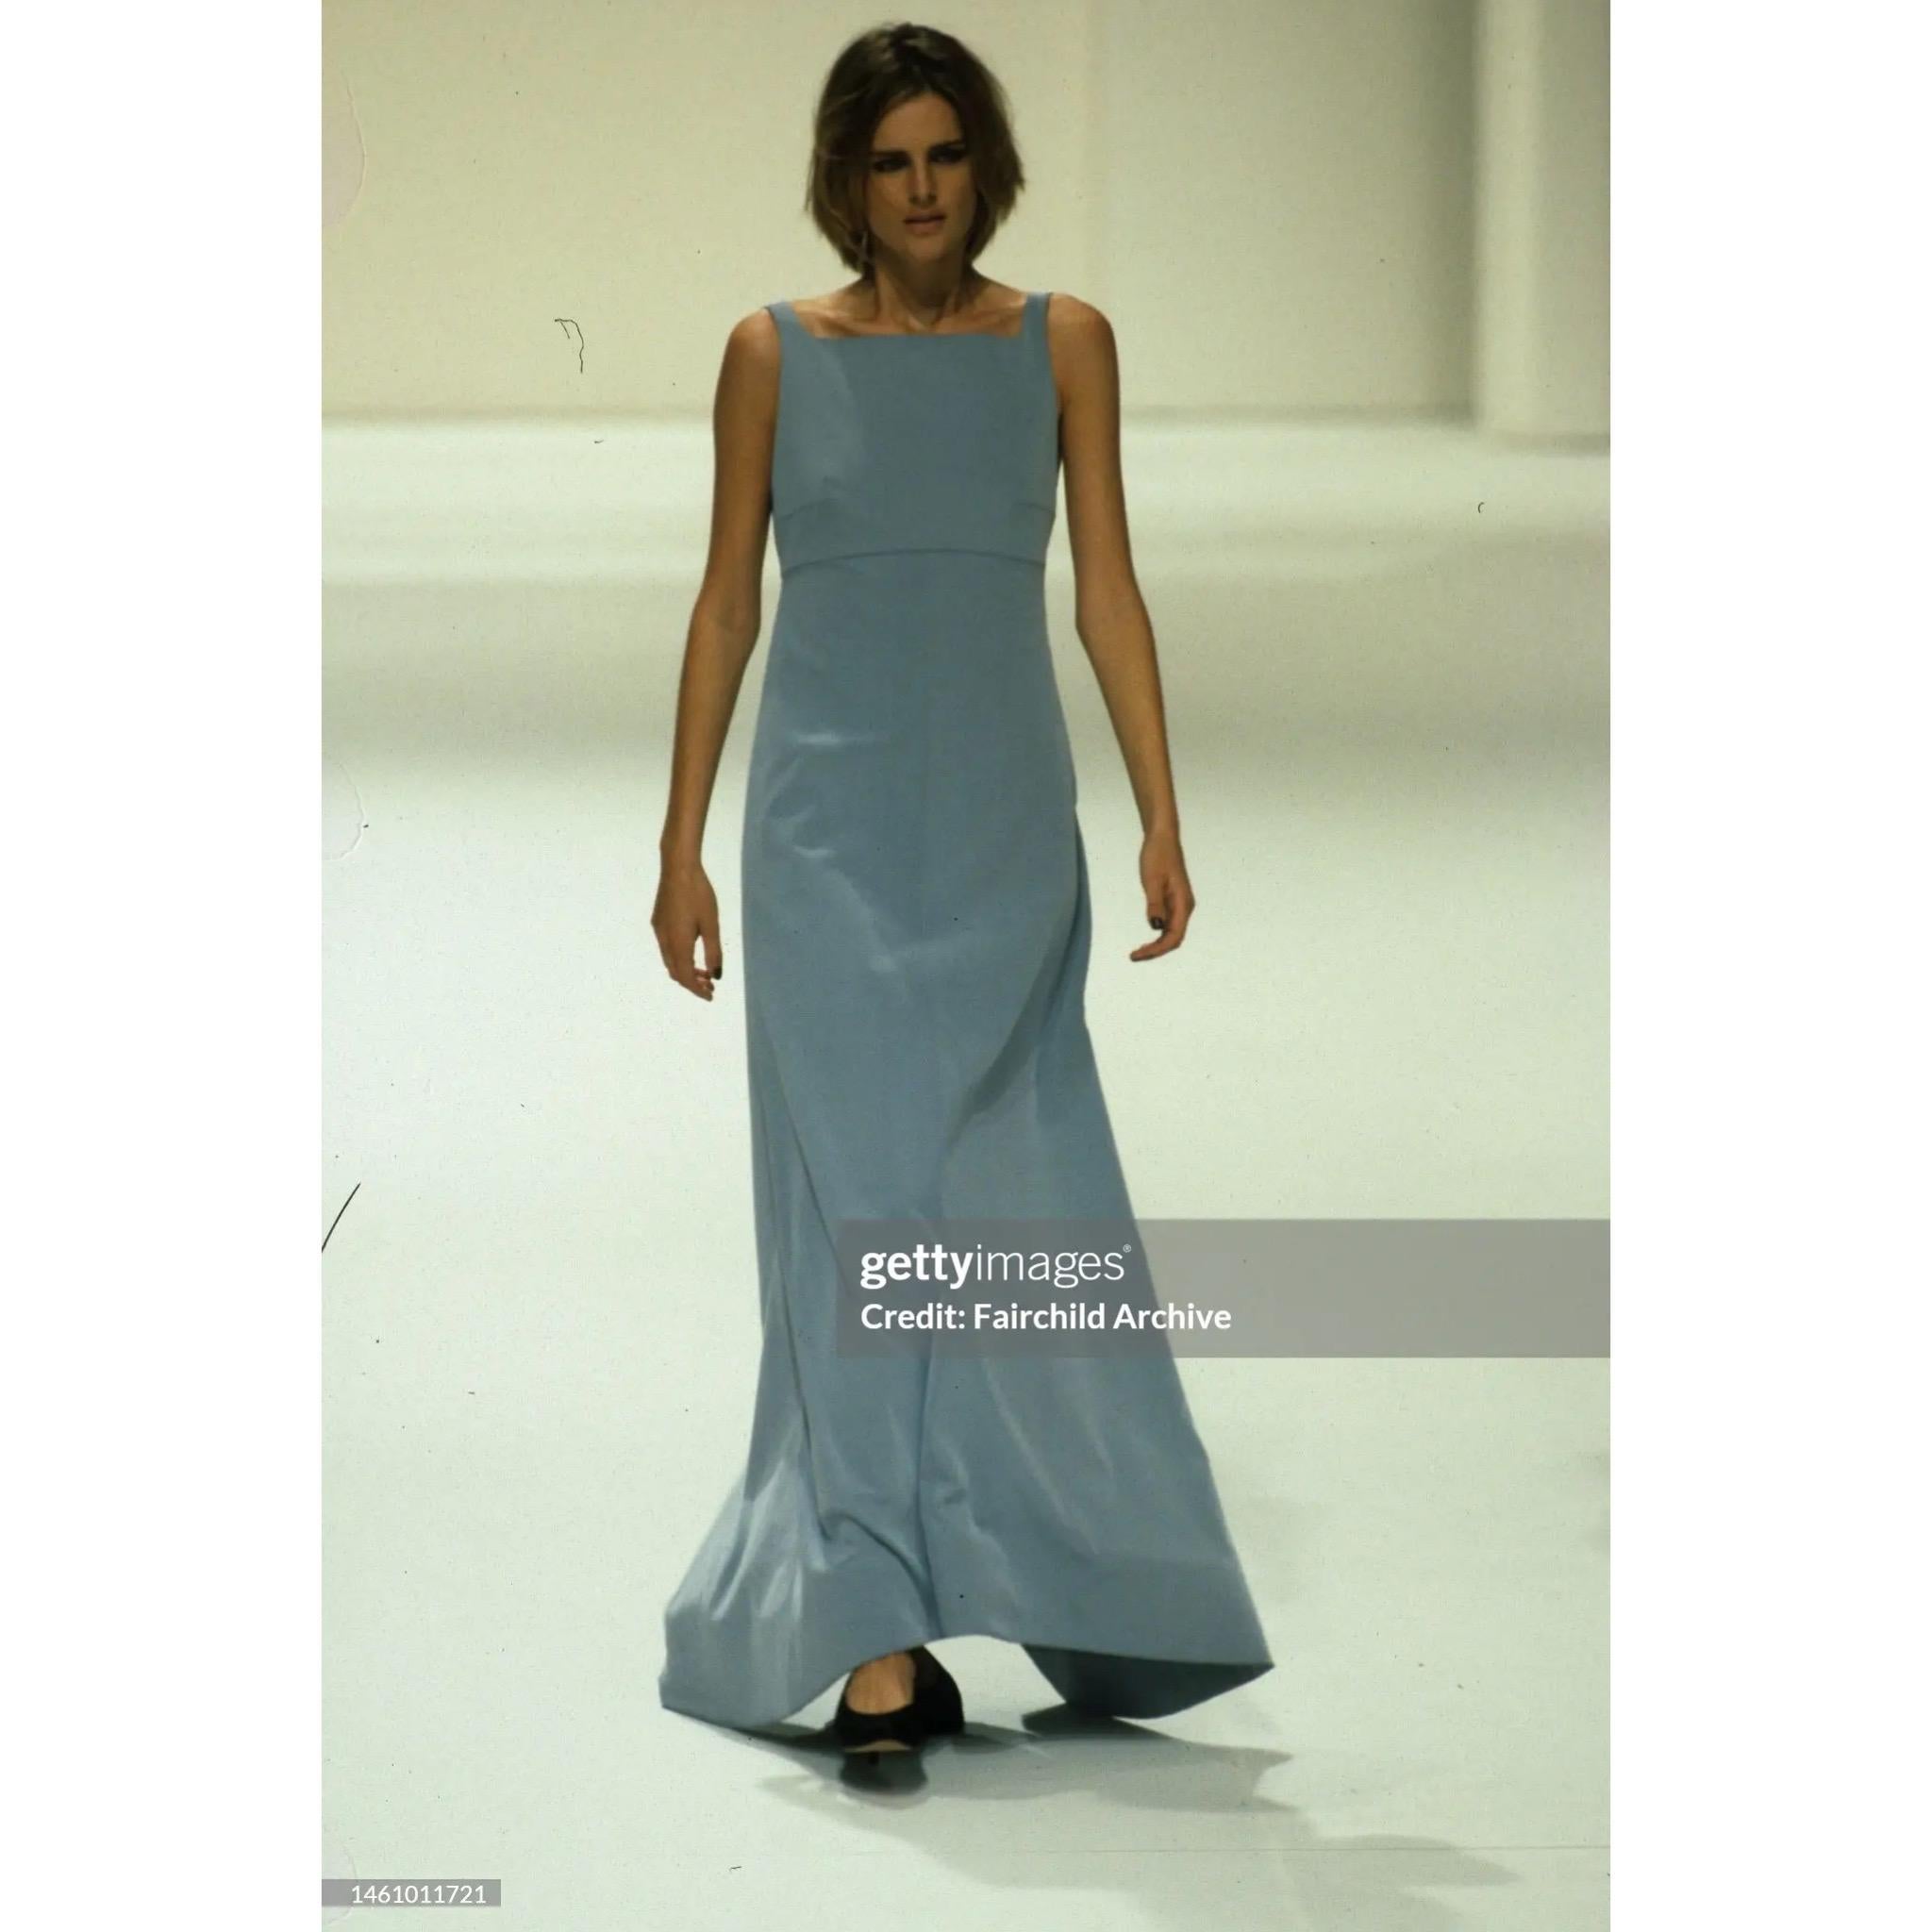 Gorgeous Chanel by Karl Lagerfeld grey blue gown with dark navy train from Spring Summer 1998 collection as seen on the runway that season. 

Size on tag is 40, make sure to report to measurements for accurate fitting. 

Measurements: 

Waist: 16